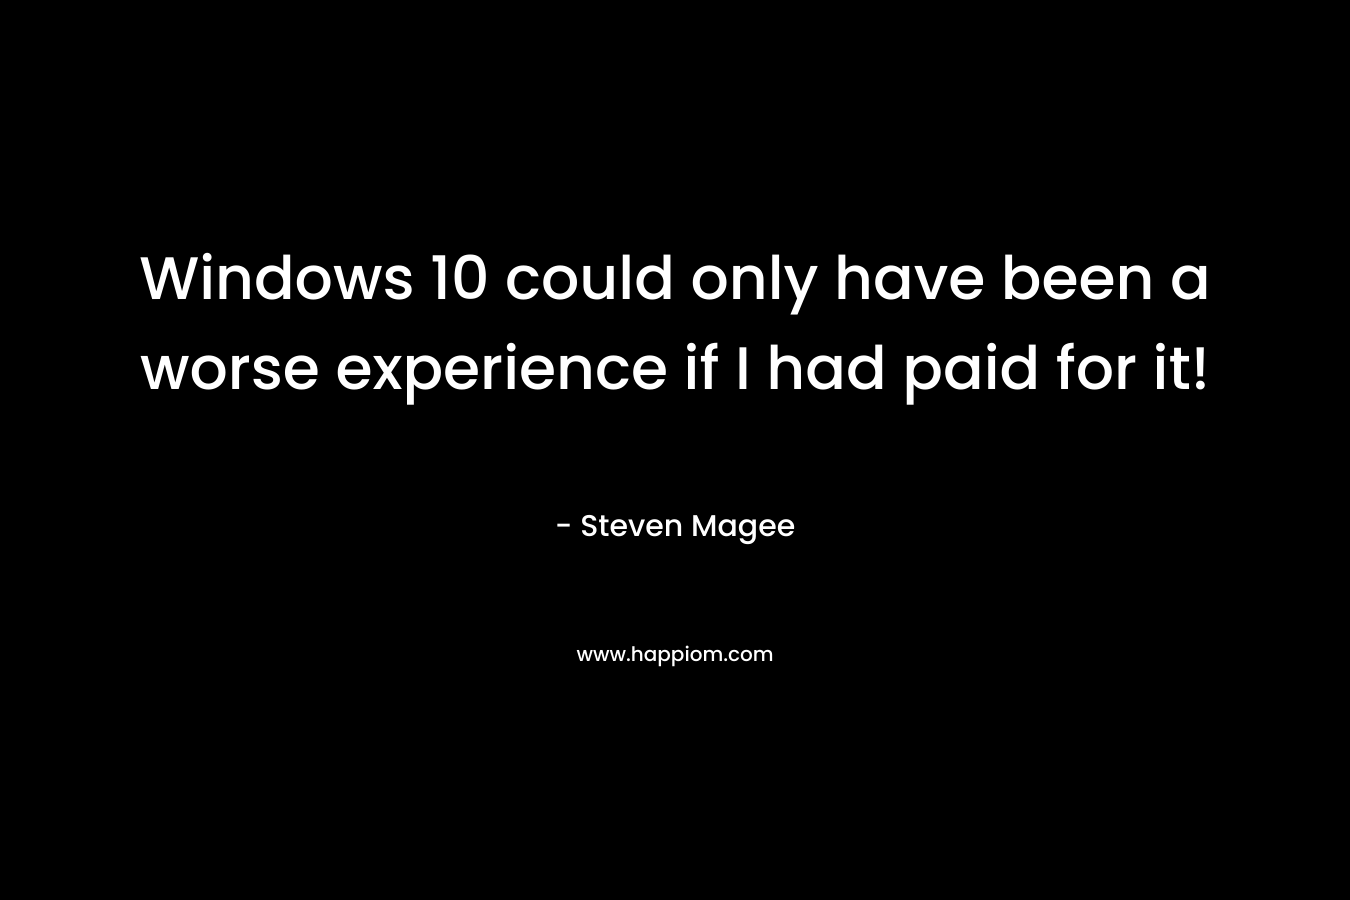 Windows 10 could only have been a worse experience if I had paid for it!